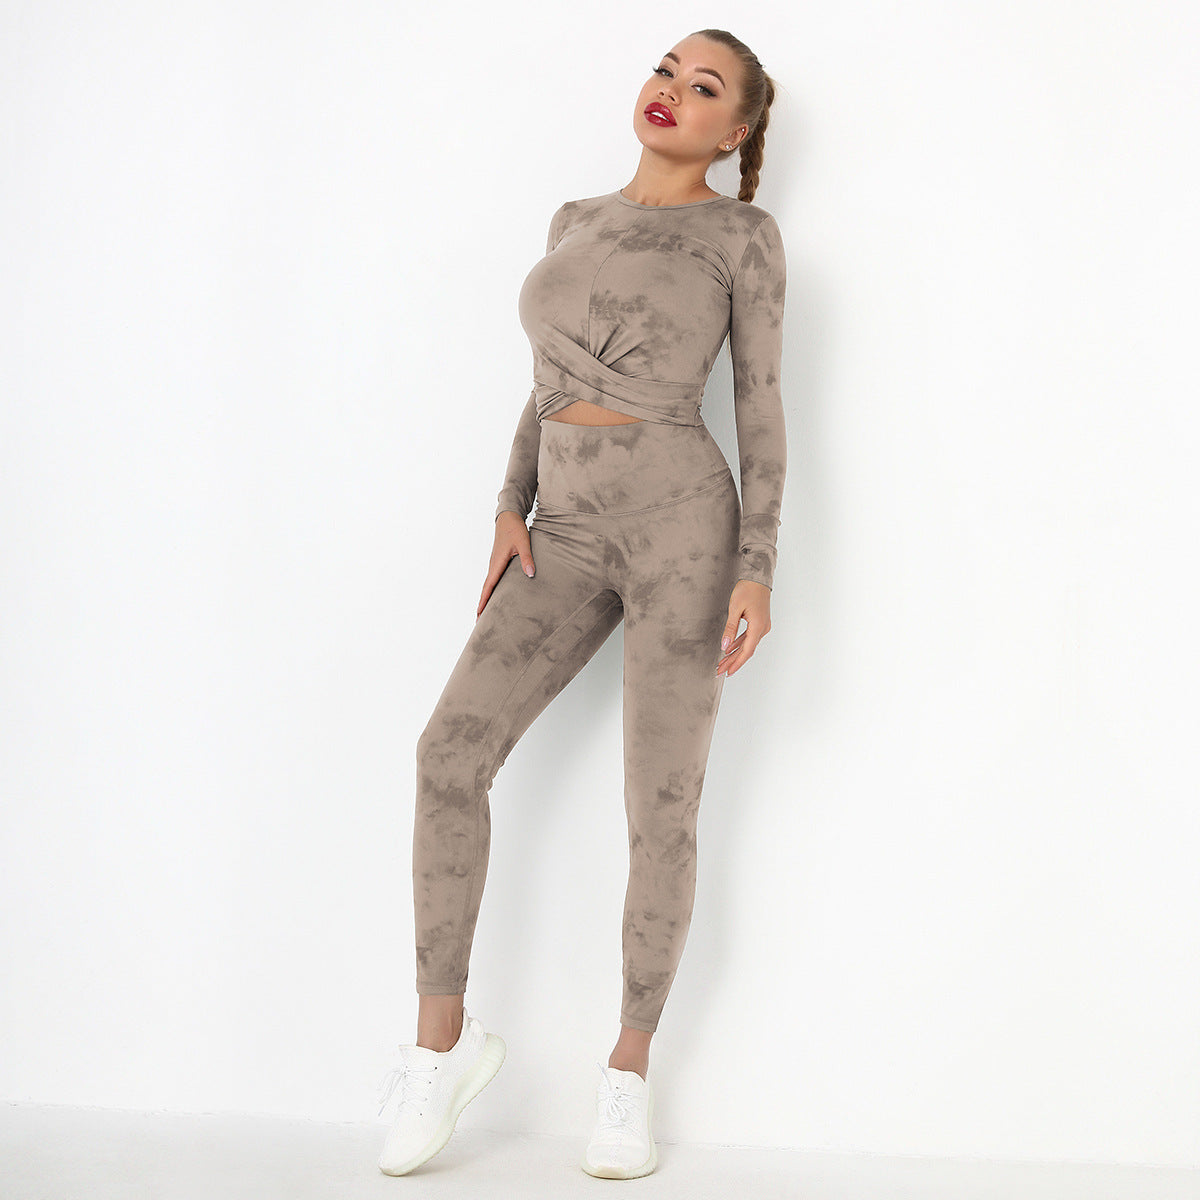 New Tie Dye Yoga Clothes Nude Sanding Sports Long Sleeve Fitness Sports Trousers Yoga Fitness Women's Suit